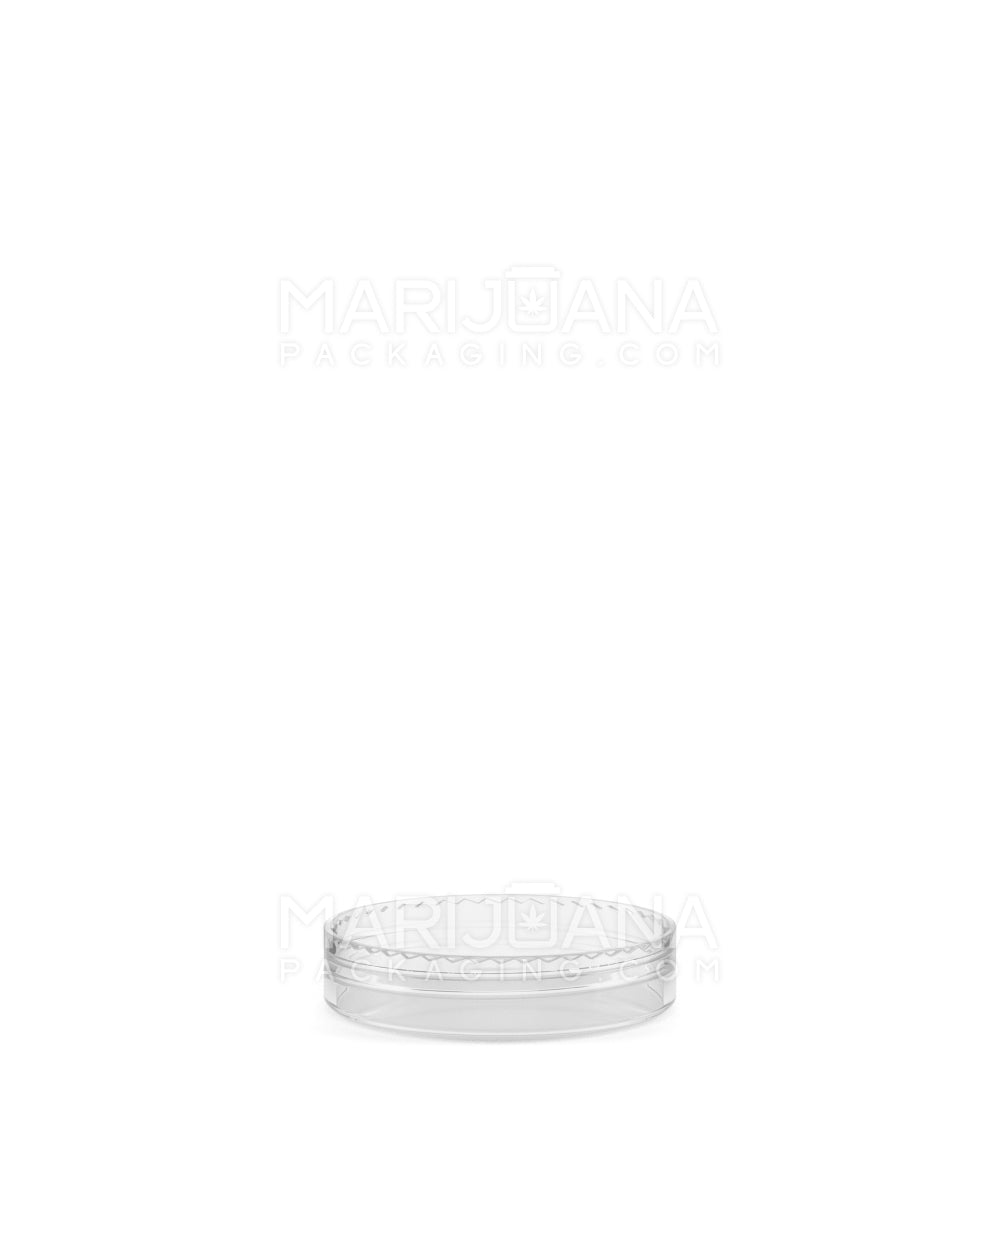 Clear Concentrate Containers w/ Screw Top Cap | 5mL - Plastic | Sample - 11